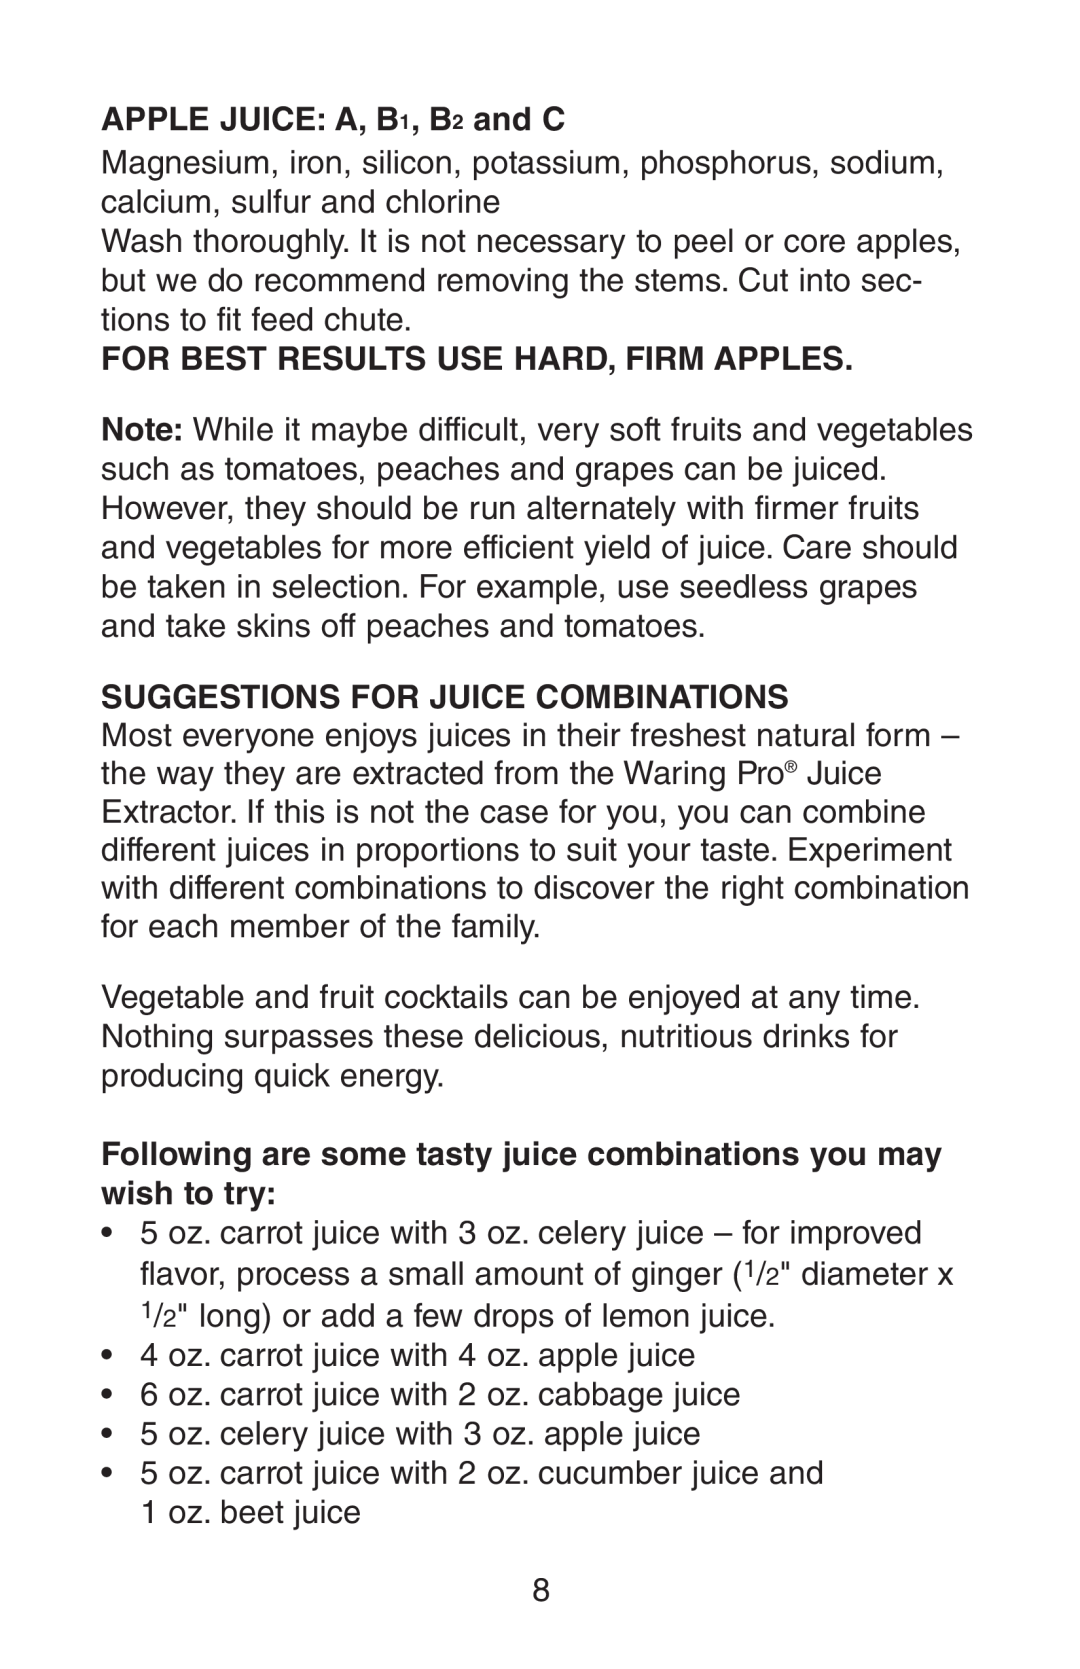 Waring JEX328 APPLE JUICE A, B1, B2 and C, For Best Results Use Hard, Firm Apples, Suggestions For Juice Combinations 